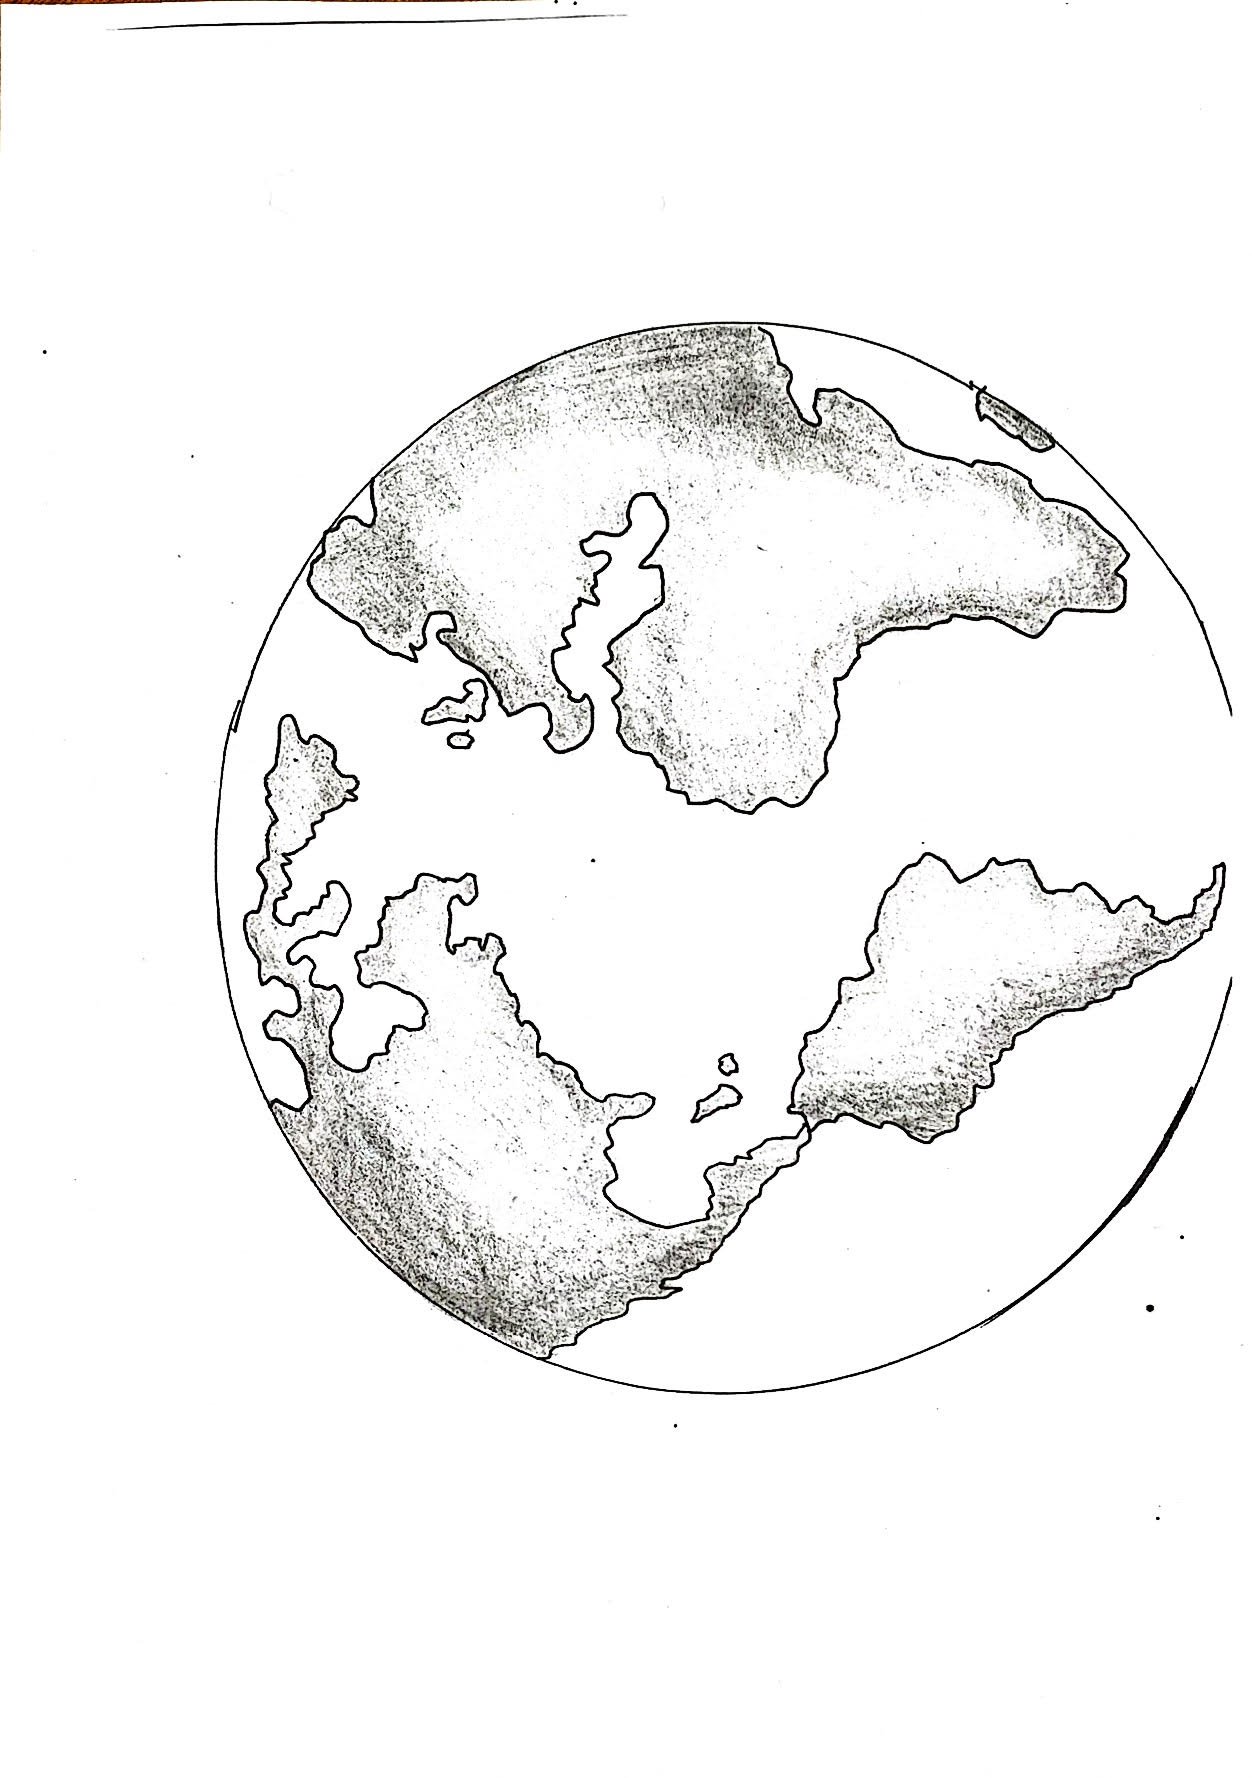 Illustration - the earth in globe view